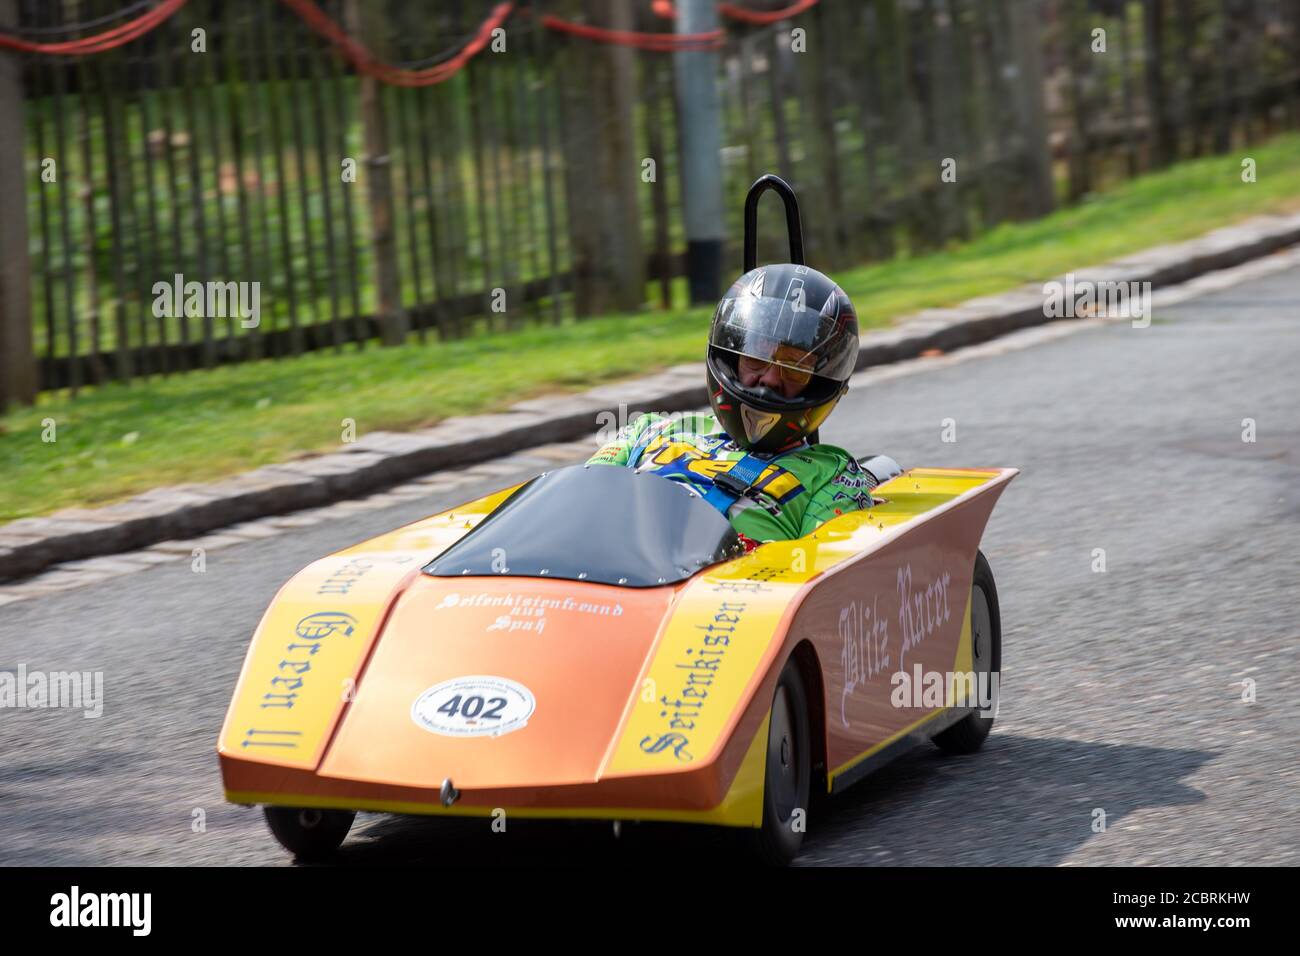 Freital, Germany. 15th Aug, 2020. 11th German Soapbox Racing Championships  in Freital, Saxony. Hansi Wittkowski, soapbox name: Blitz-Racer,  Großräschen (Brandenburg), Germany. A good 80 drivers take part in the race  in the